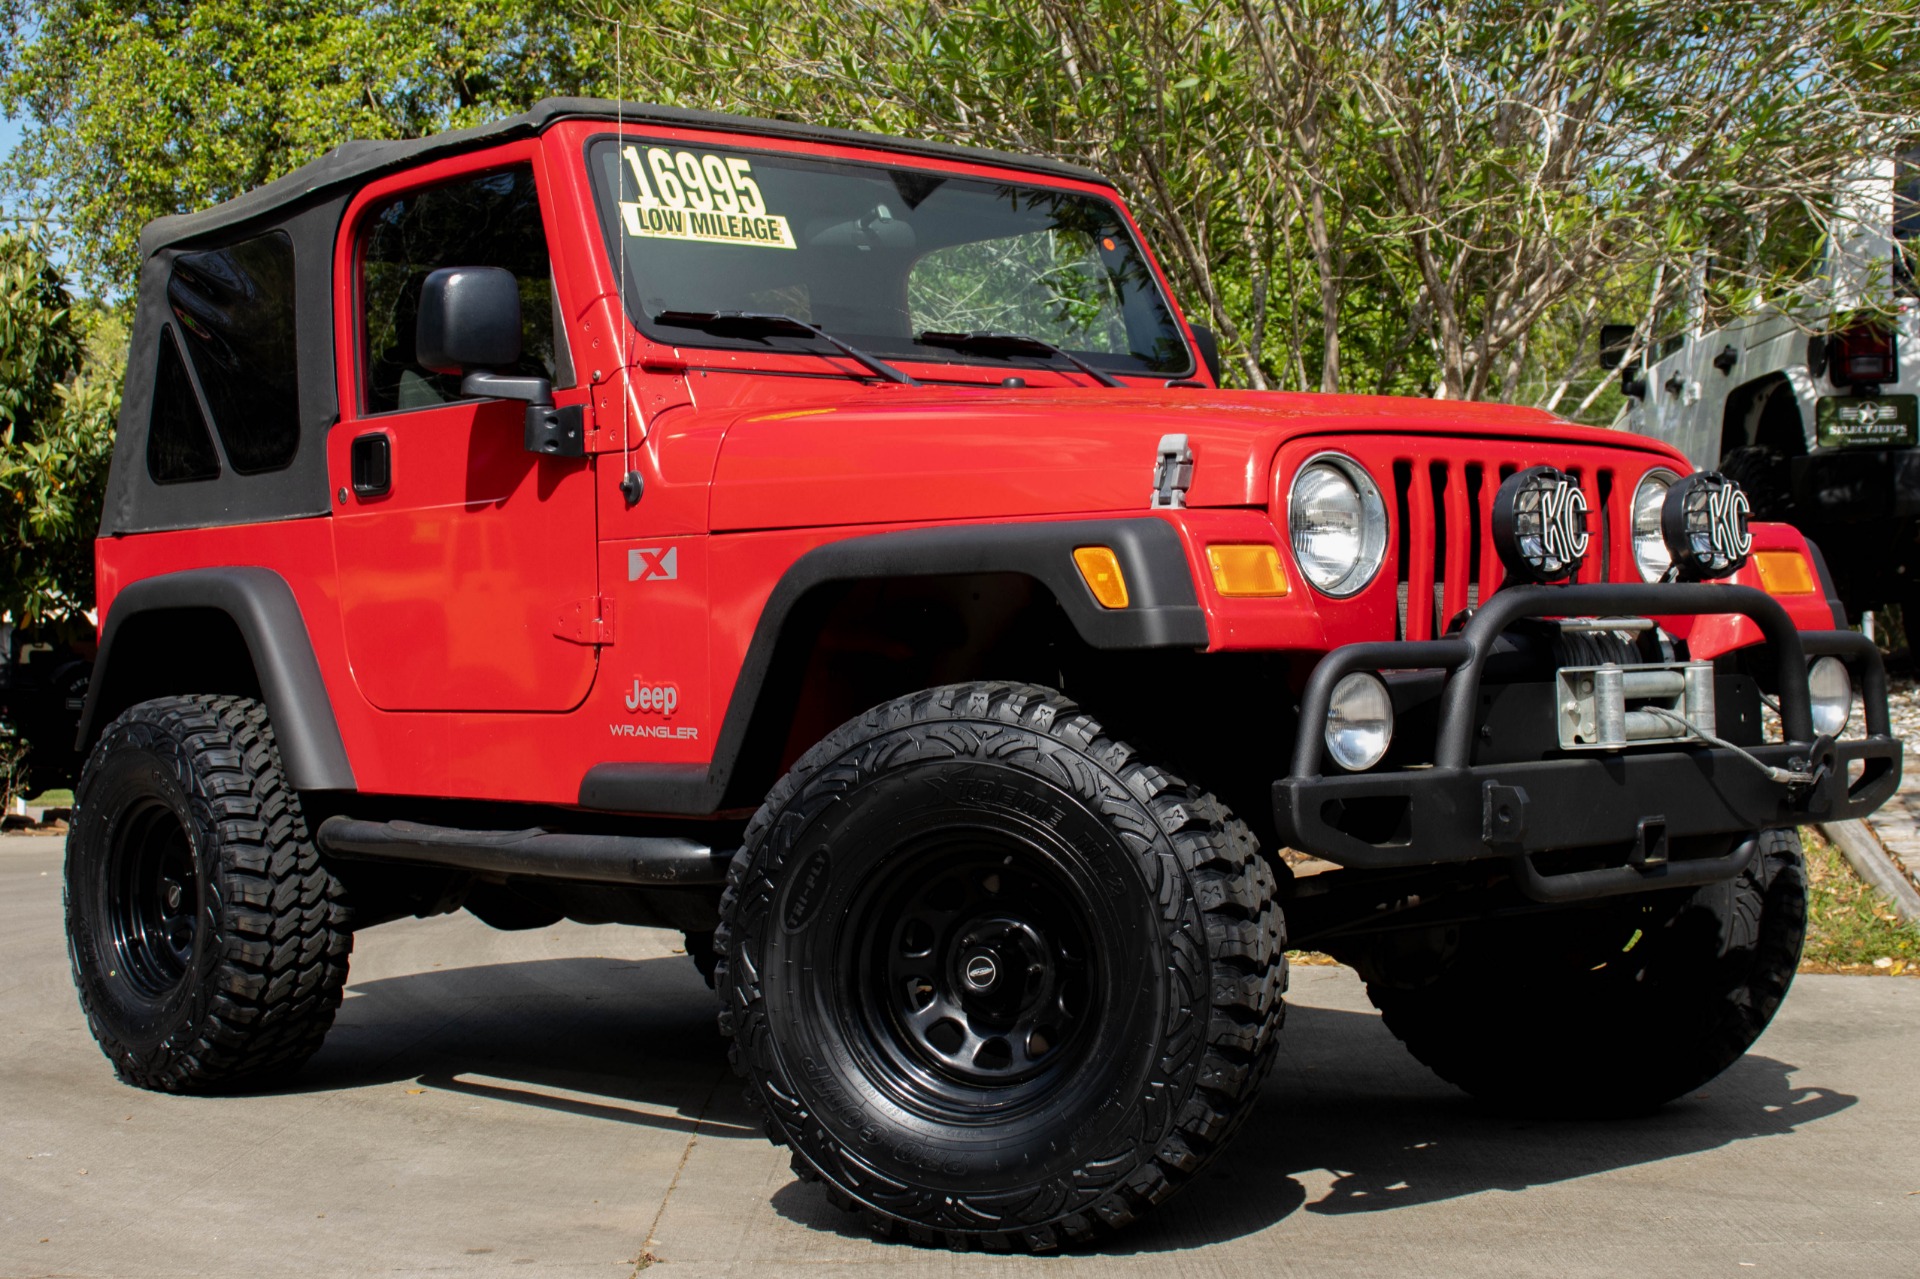 Used 2006 Jeep Wrangler X For Sale ($16,995) | Select Jeeps Inc. Stock  #717113